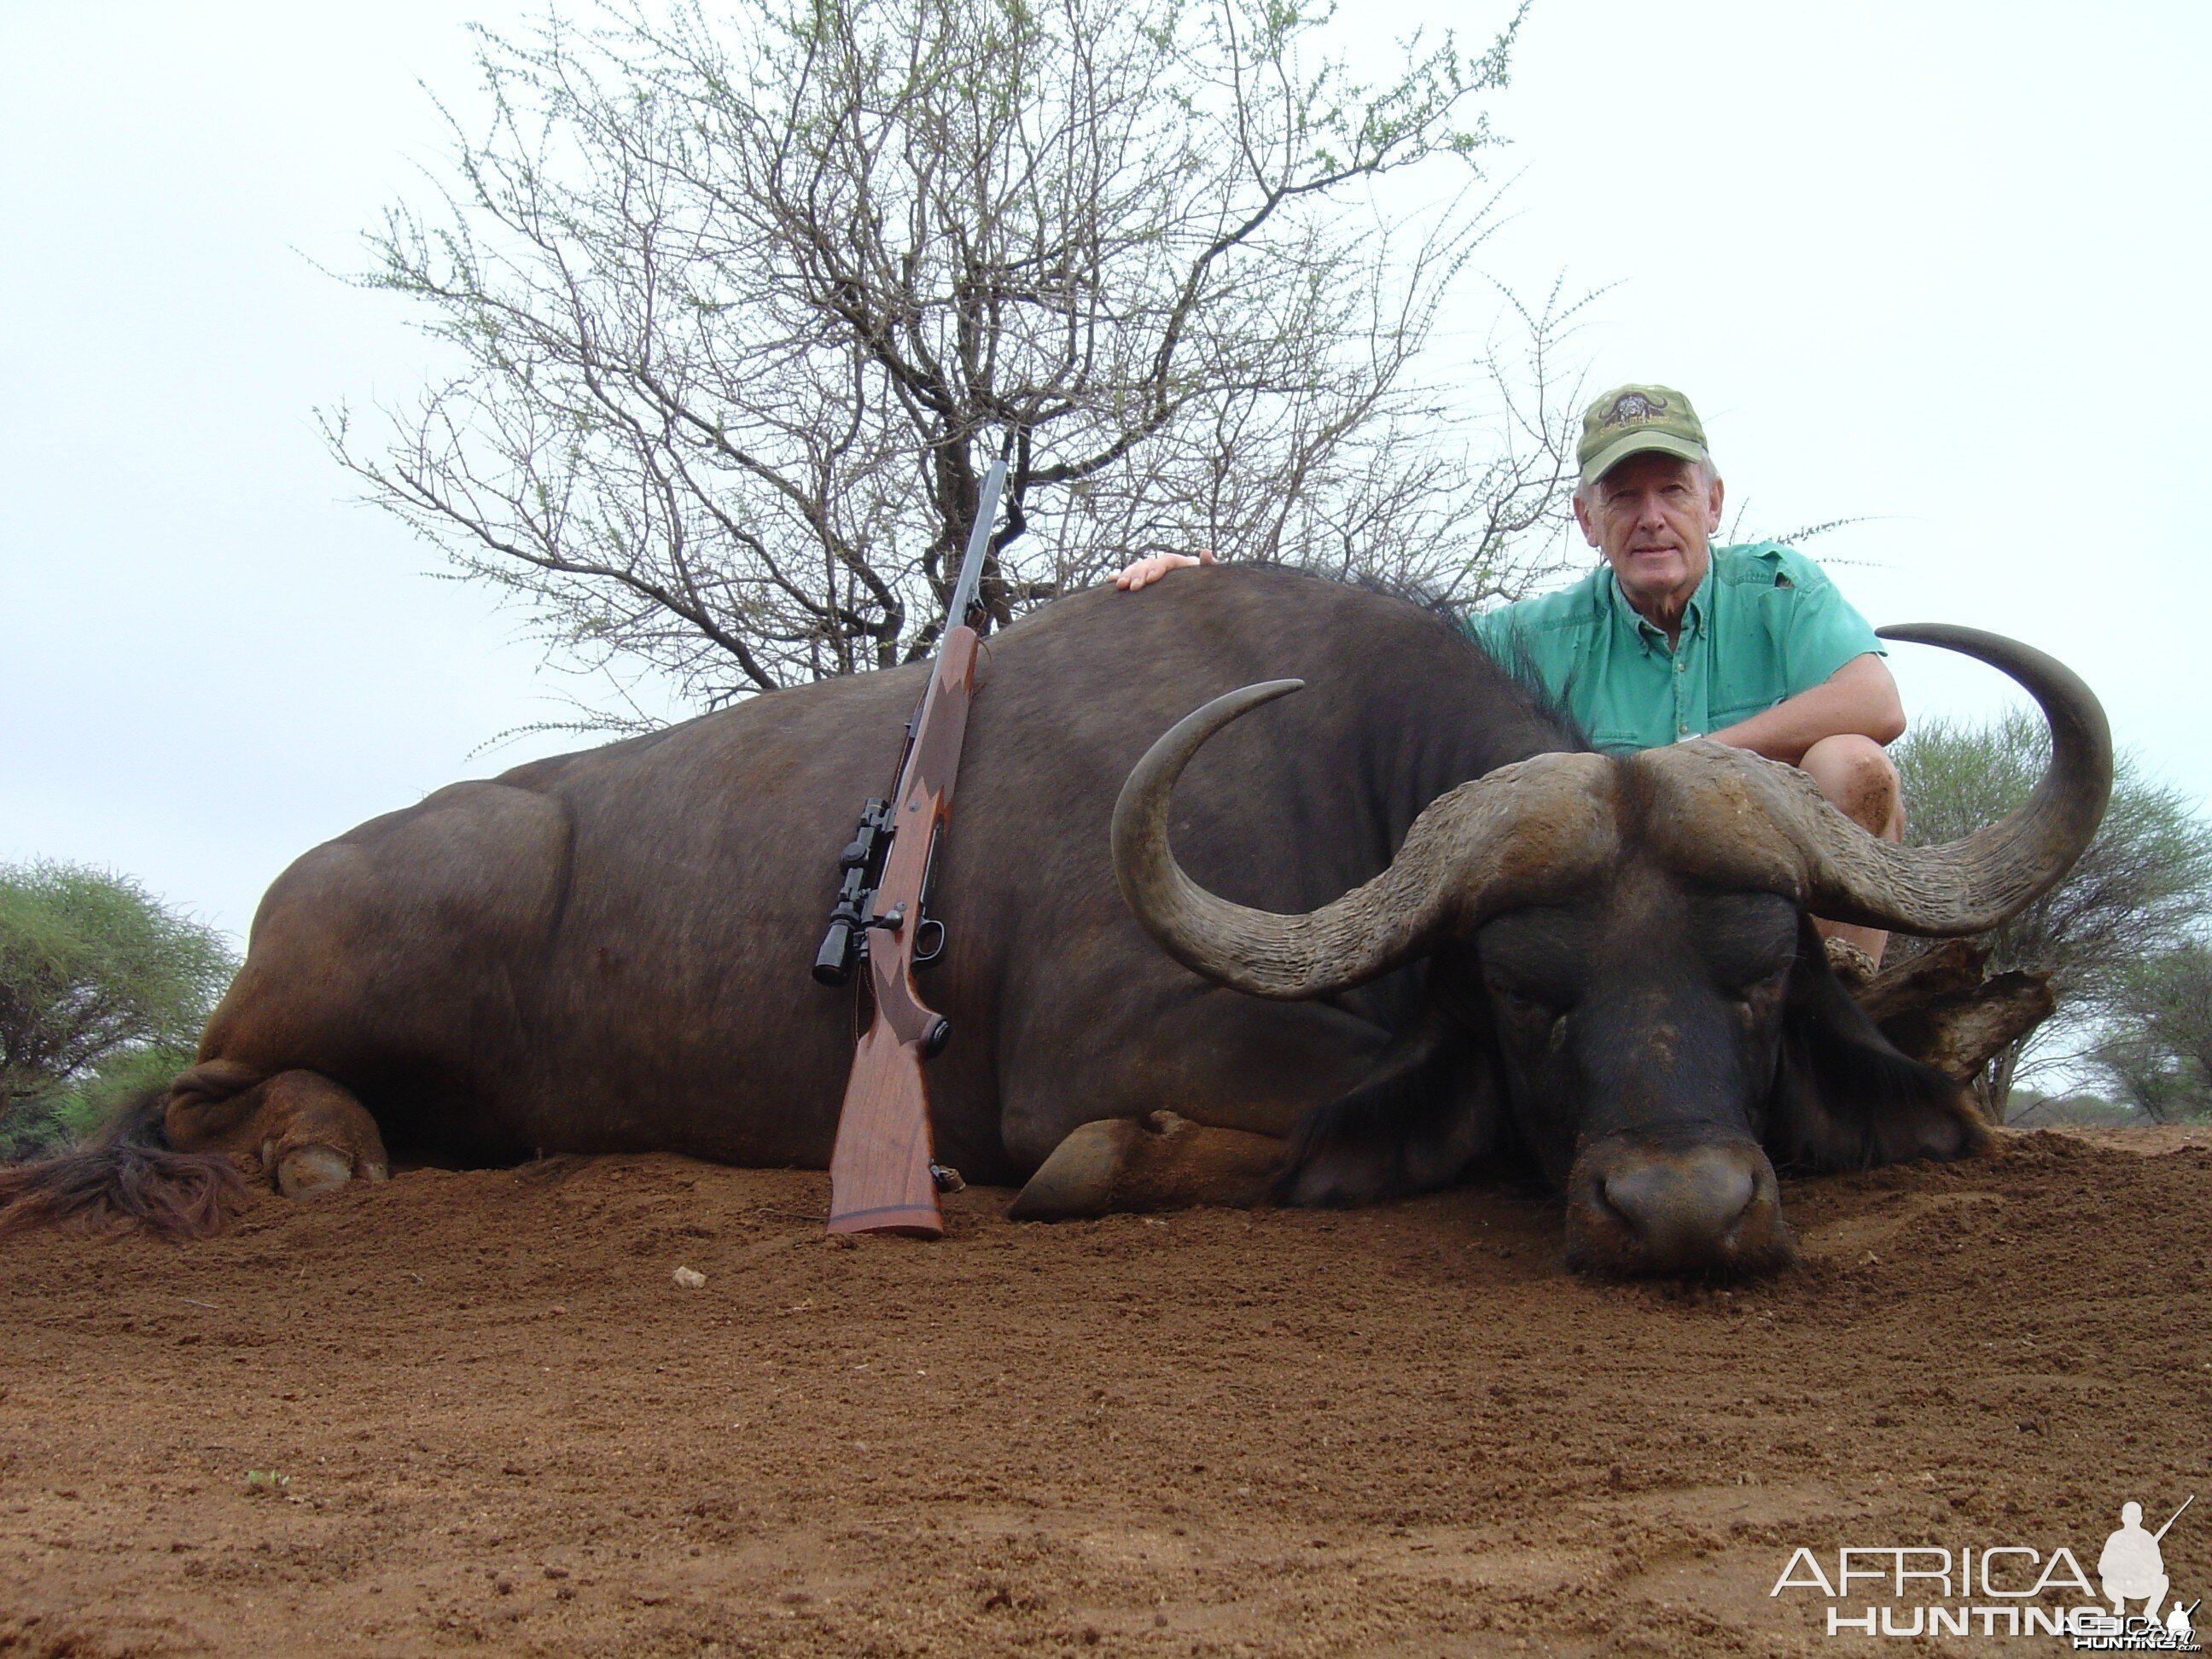 Buffalo hunting in South Africa